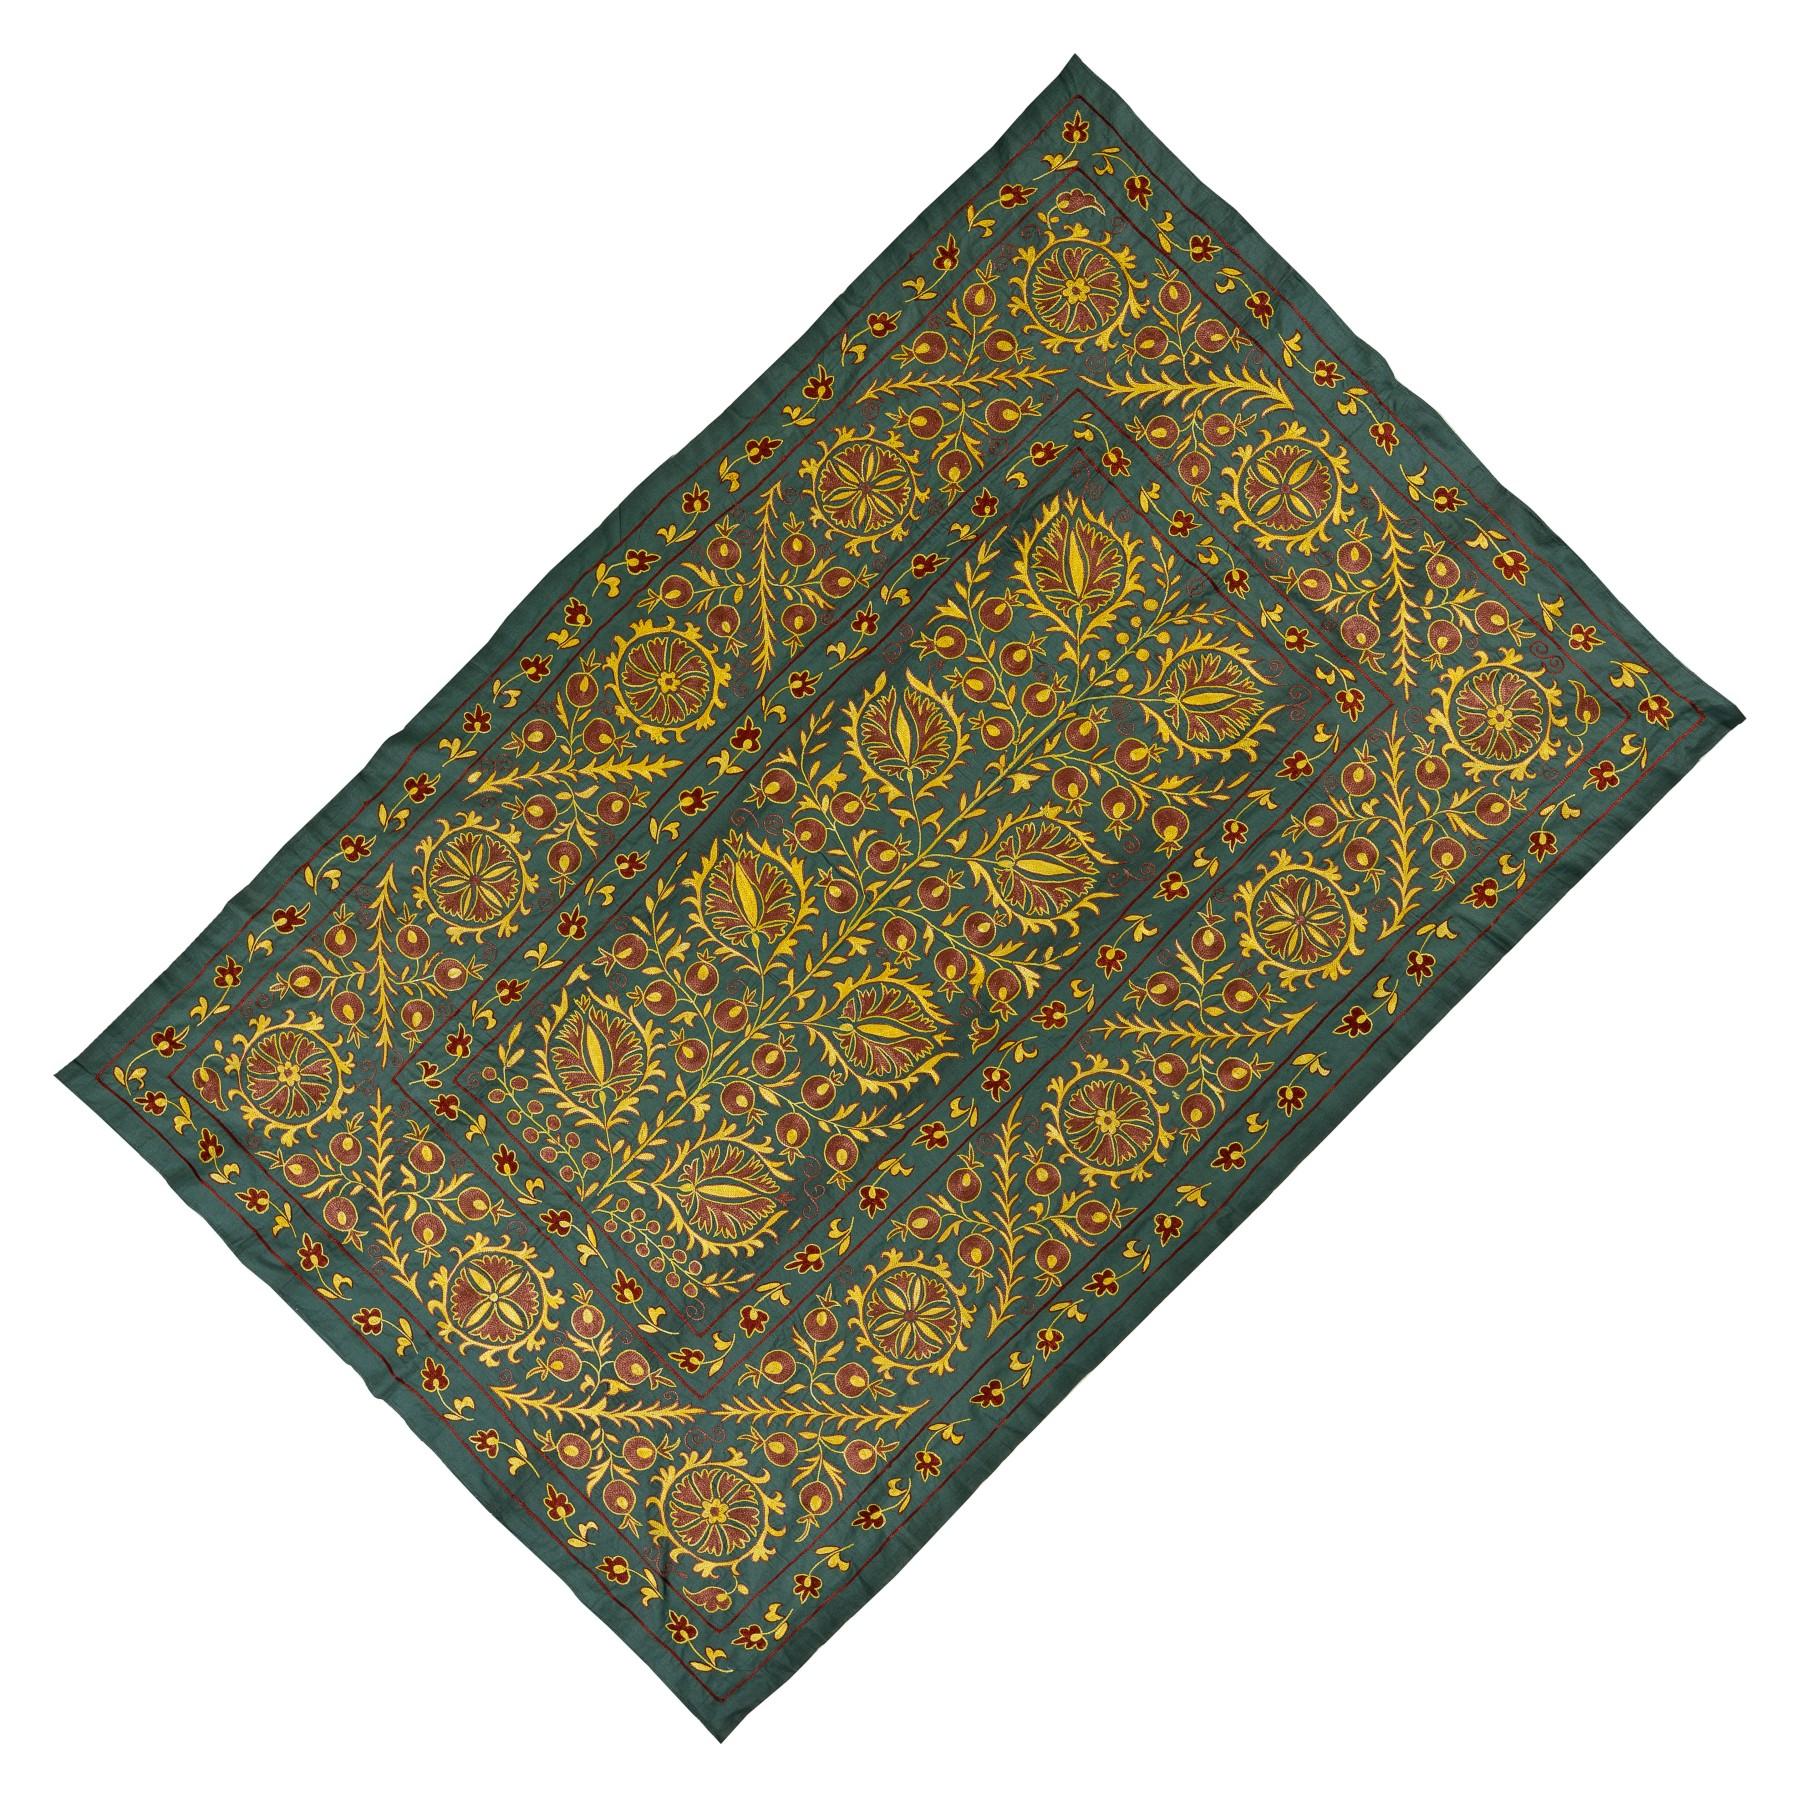 Modern Uzbek Suzani Textile, Embroidered Cotton & Silk Wall Hanging For Sale 1